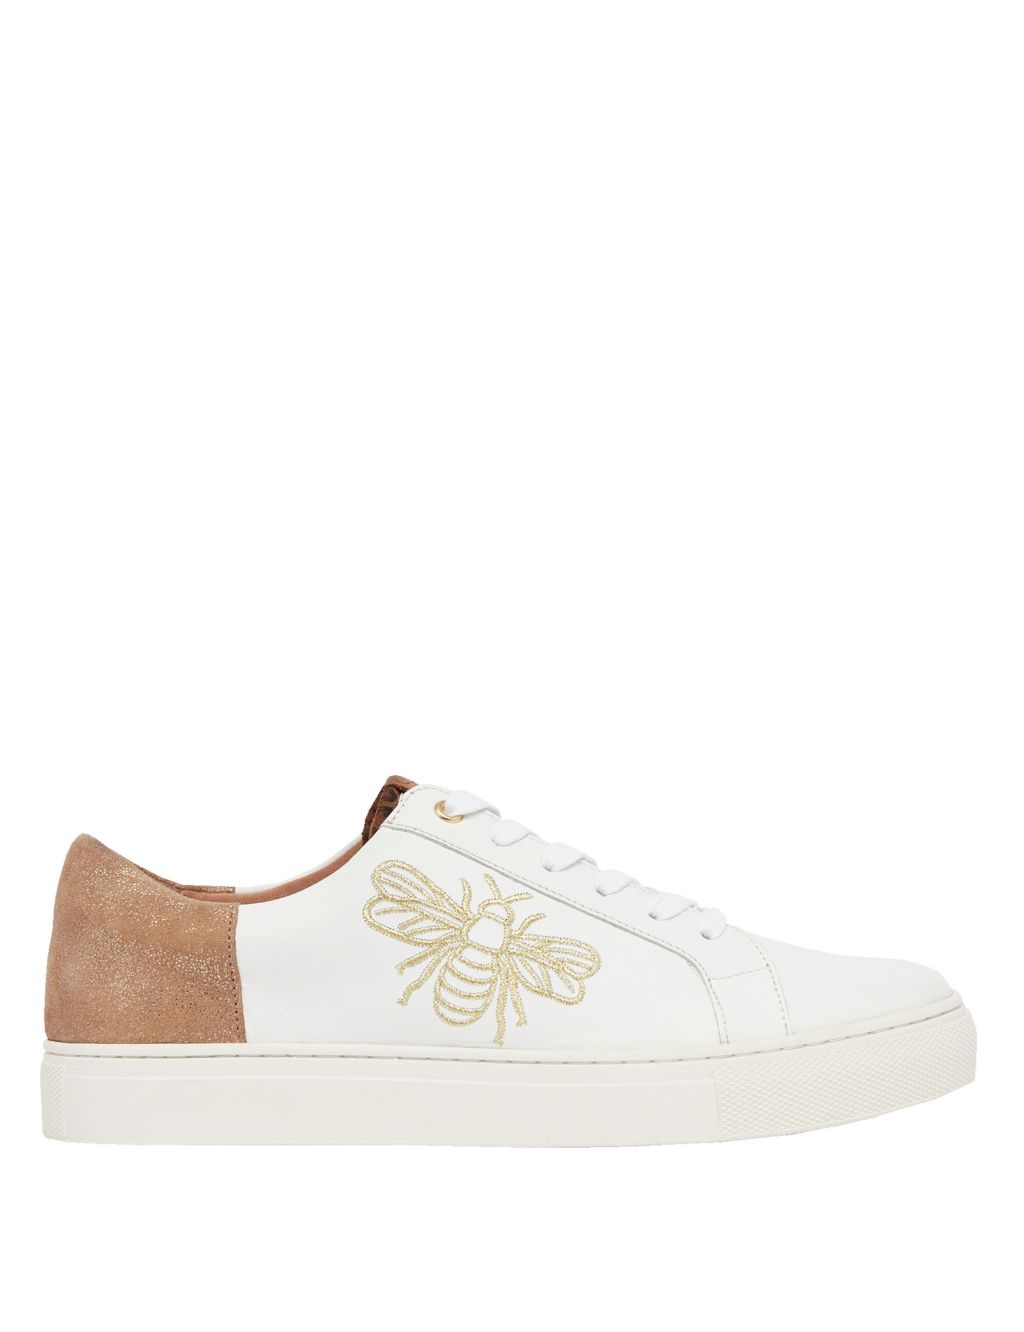 Leather Lace Up Embroidered Trainers image 1